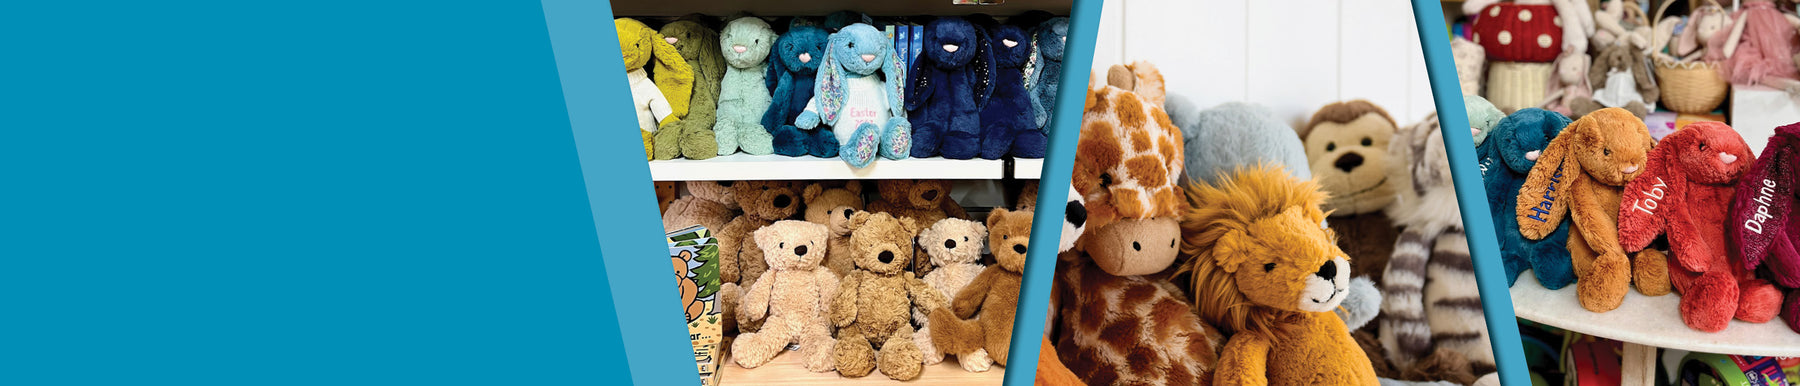 Cherrie Baby is a leading stockist of Jellycat Australia. Soft, tactile plush toys and so much more.